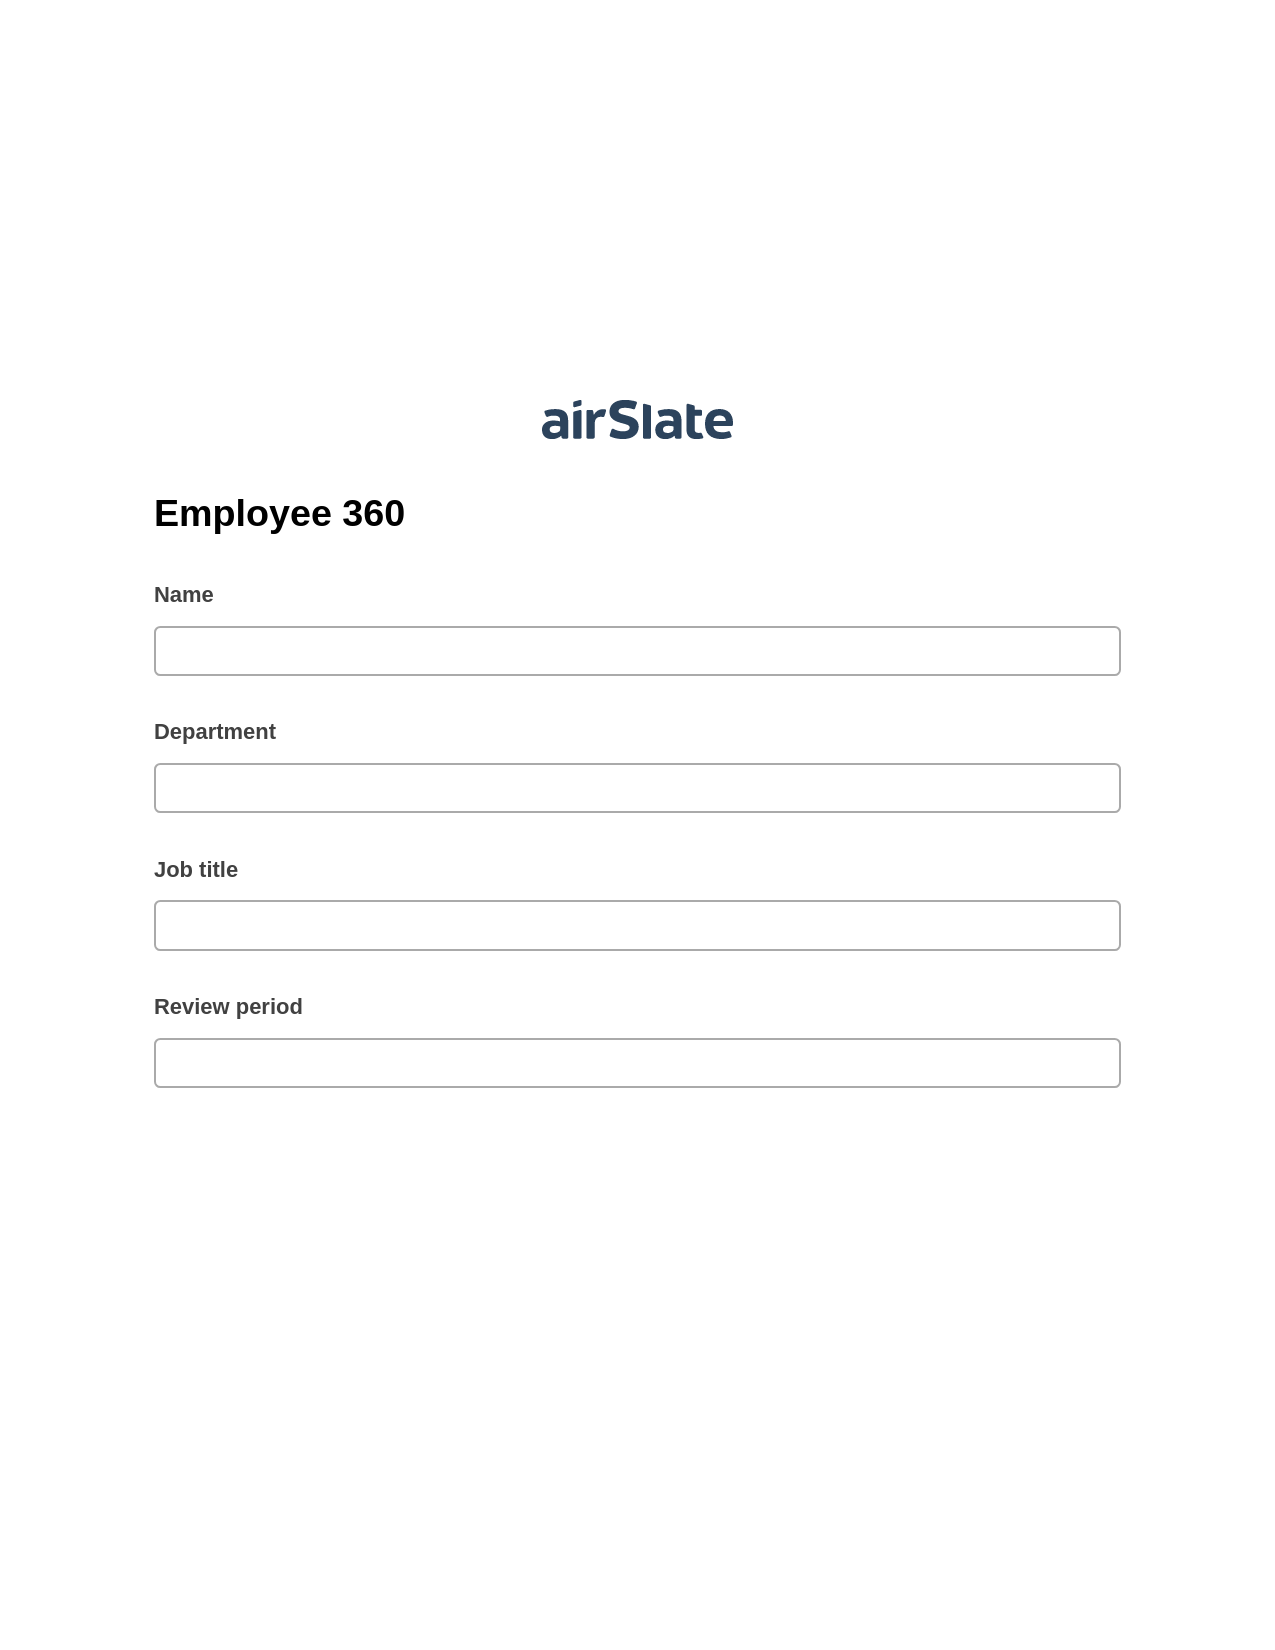 Multirole Employee 360 Pre-fill from Salesforce Records Bot, Update MS Dynamics 365 Record Bot, Export to WebMerge Bot